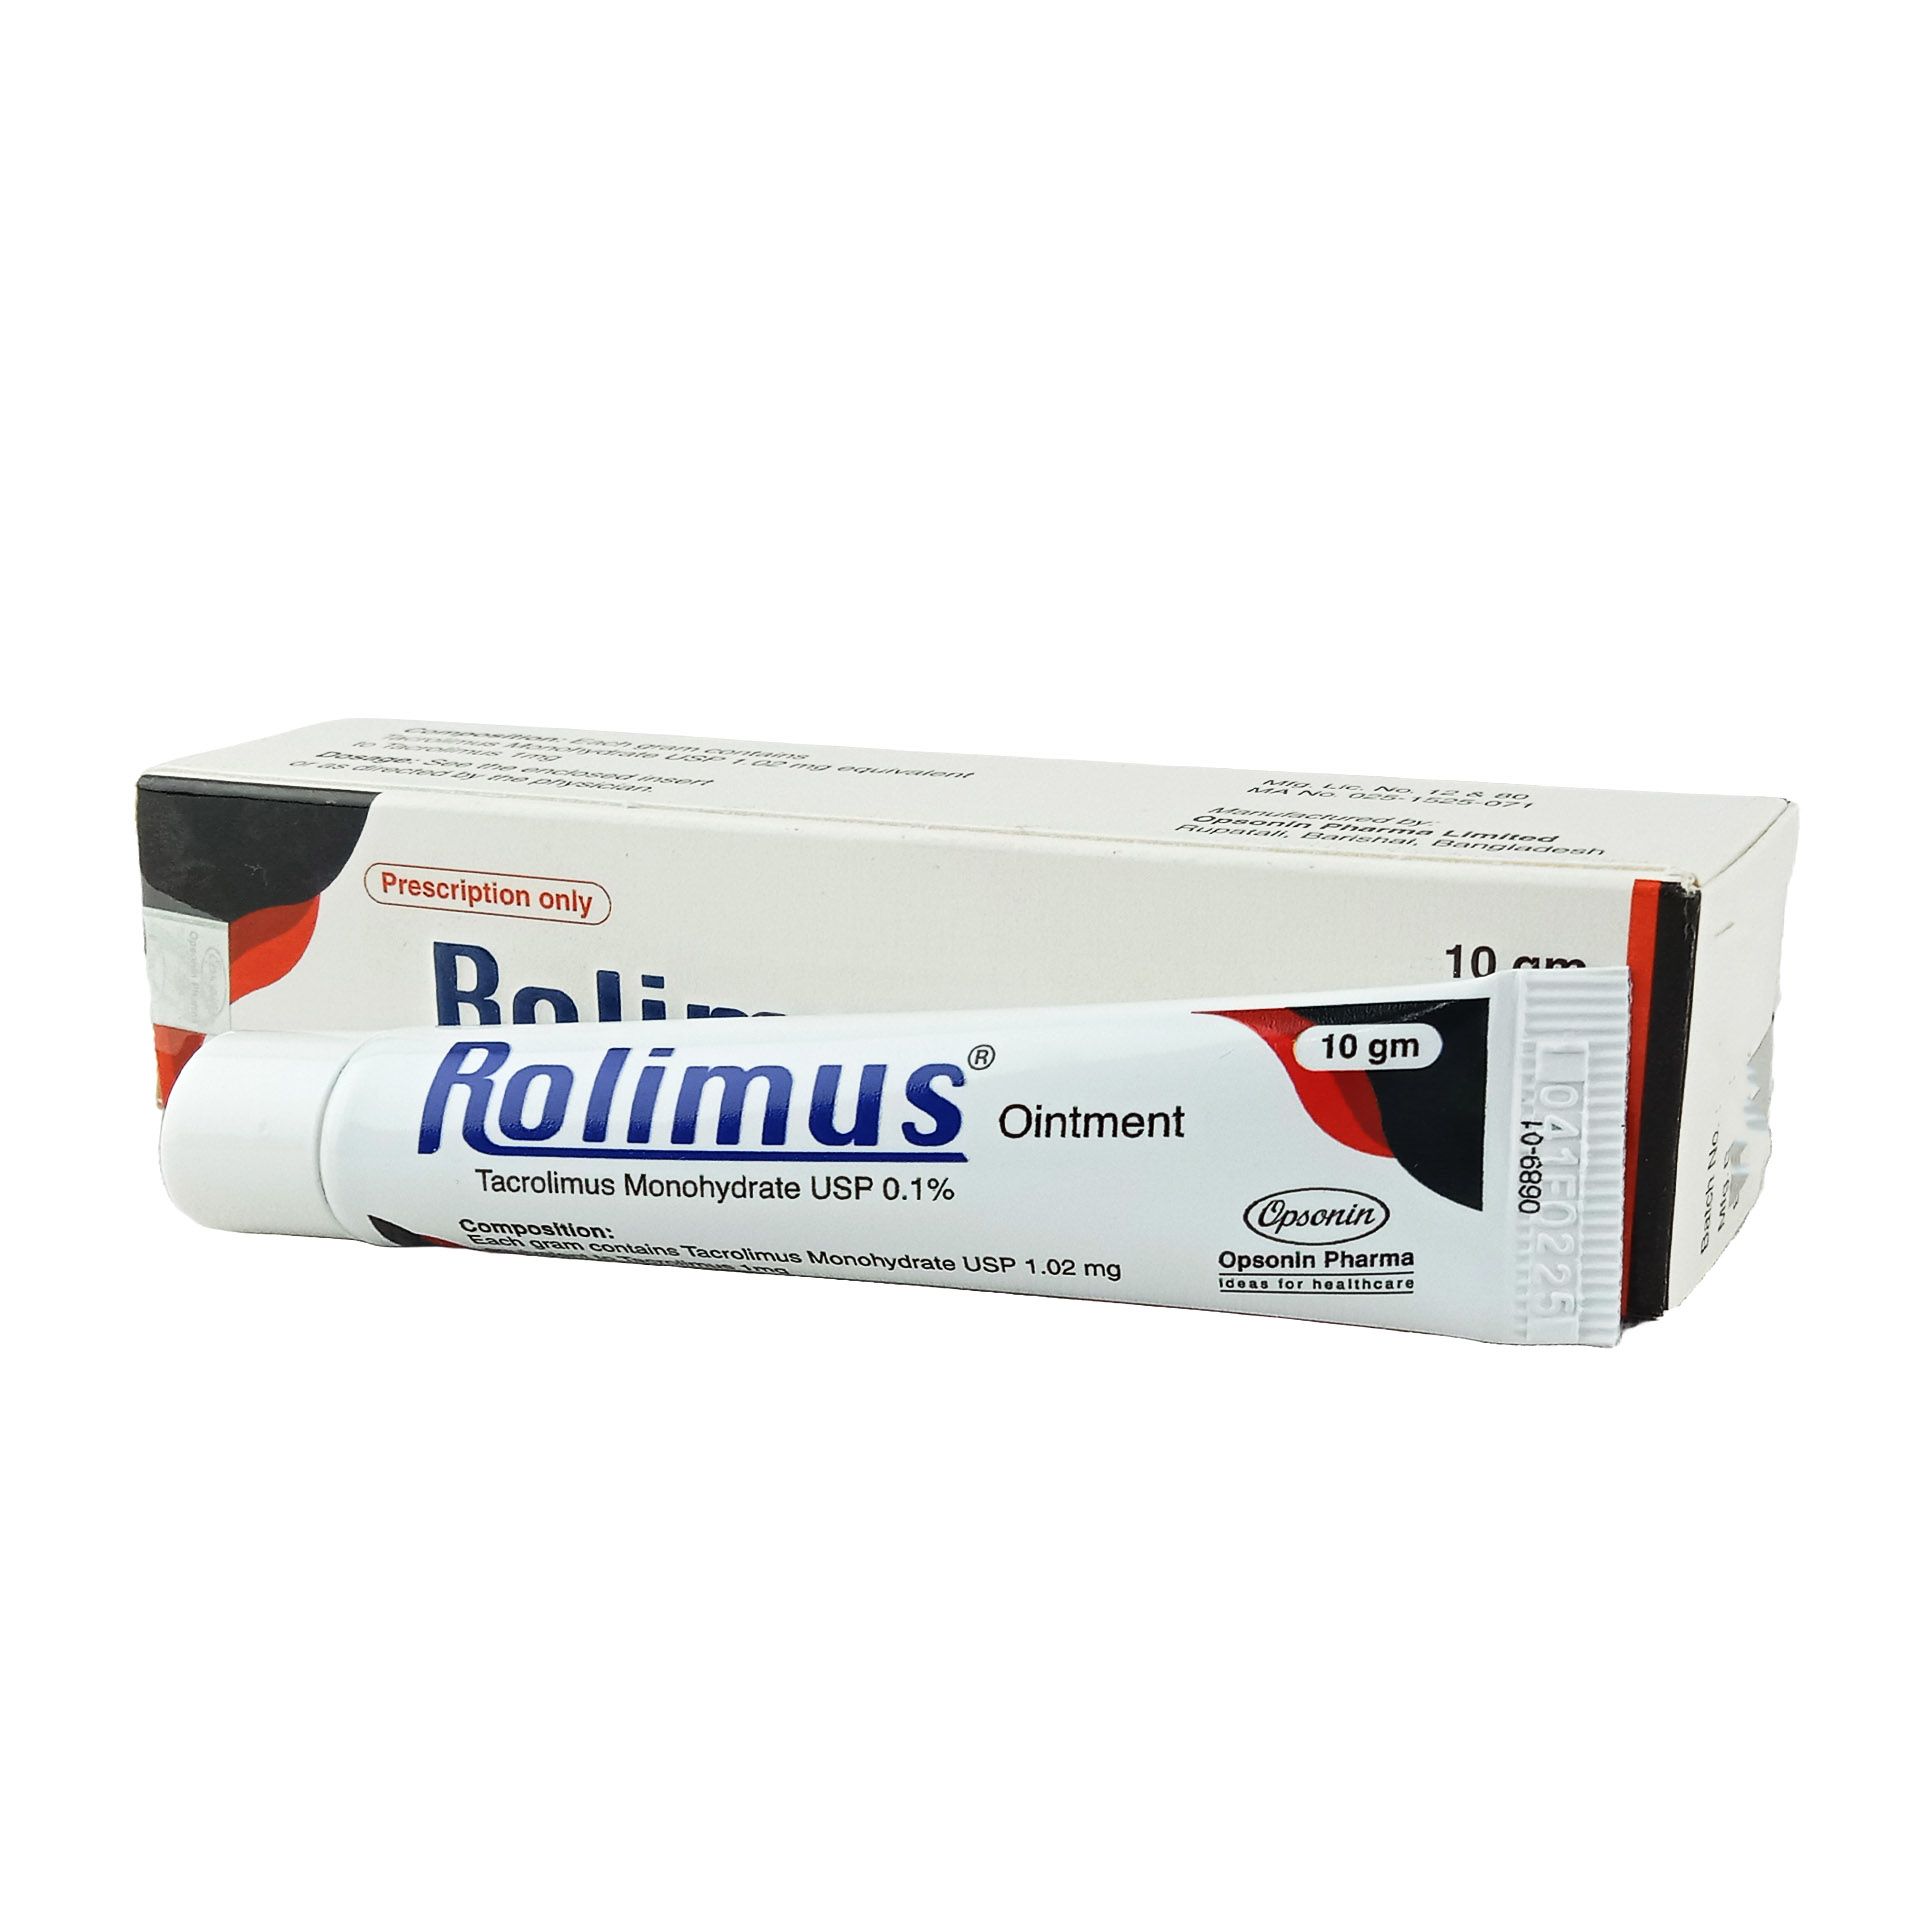 Rolimus 0.1% 0.1% Ointment